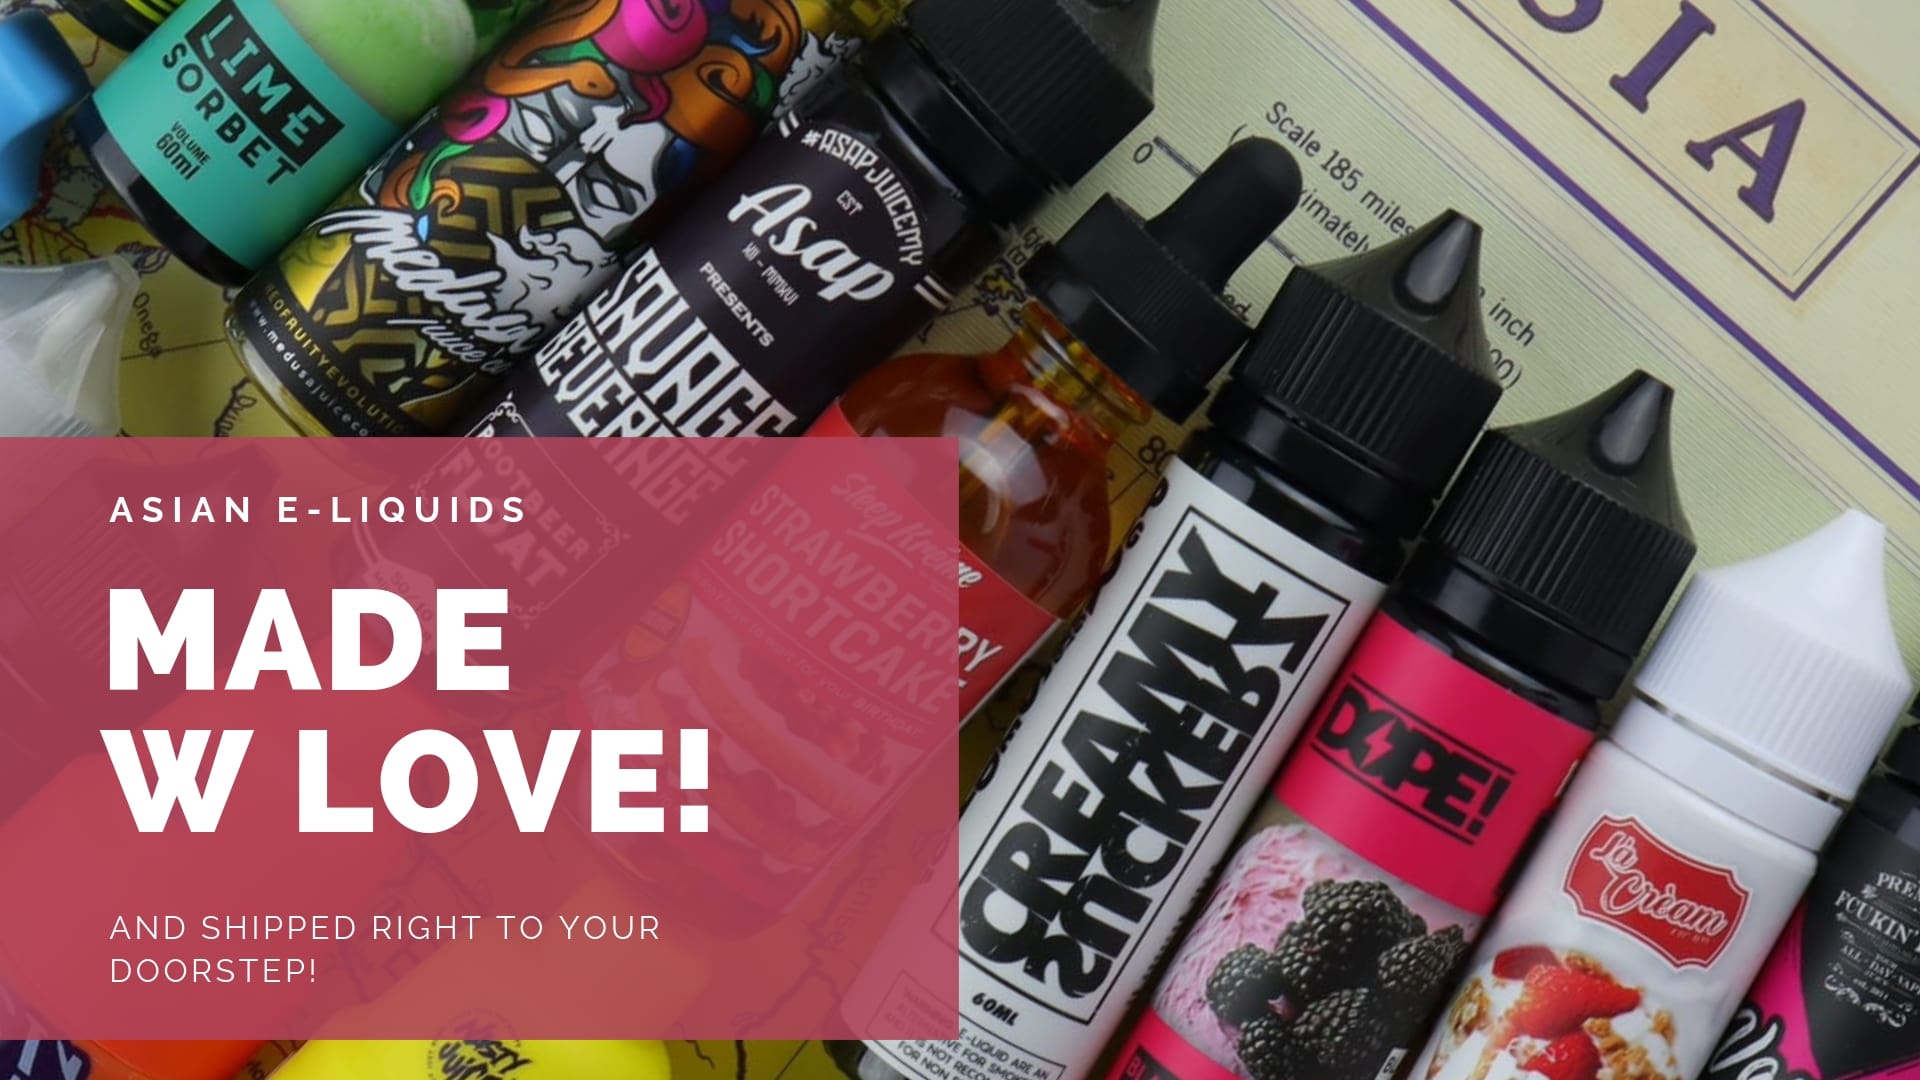 Vaping Malaysian E-Liquids for The First Time: Everything You Need to Know